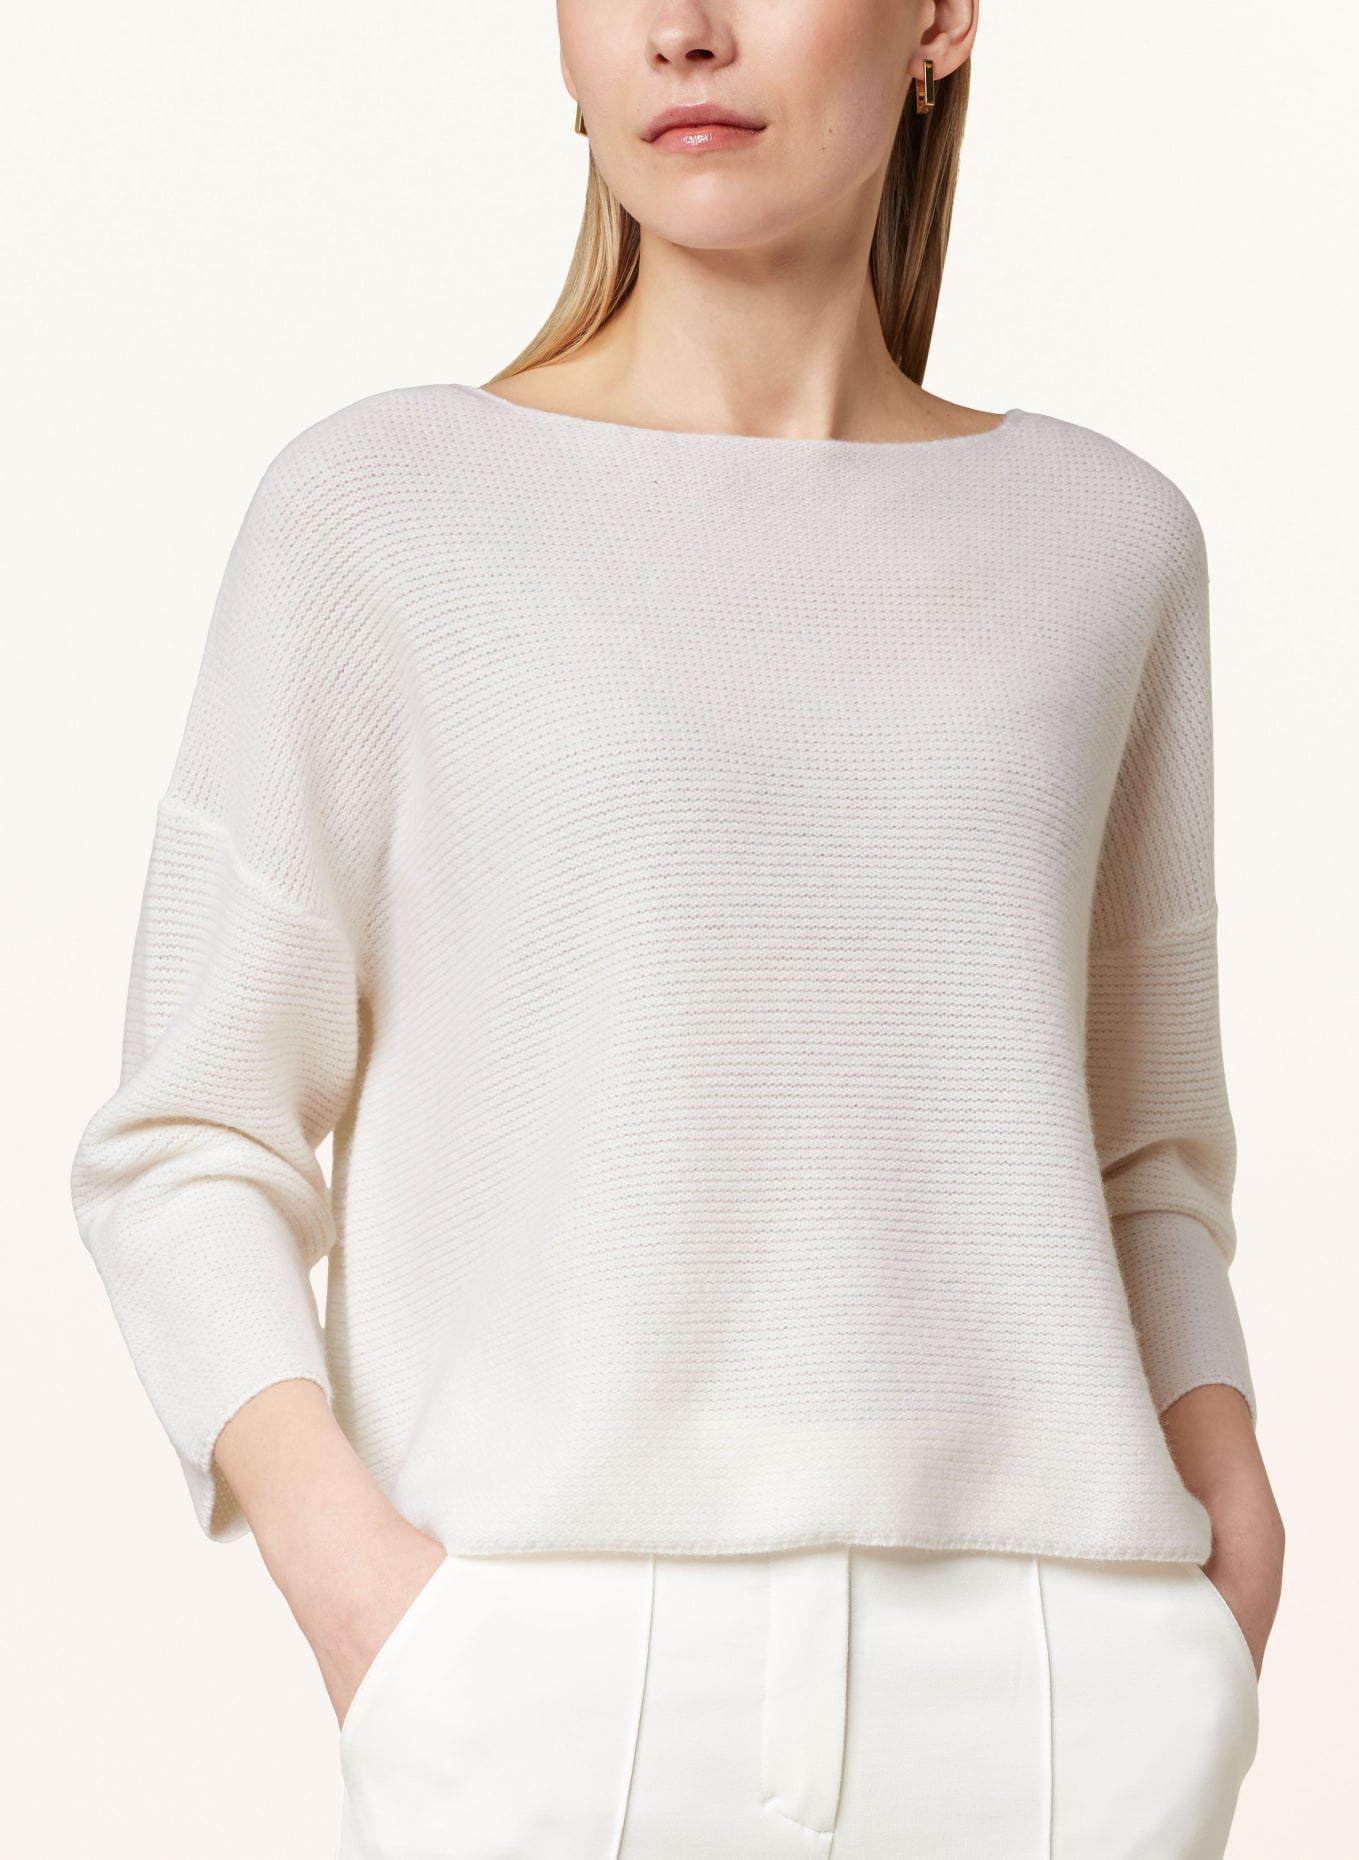 FFC Sweater with cashmere and 3/4 sleeves, Color: ECRU (Image 4)